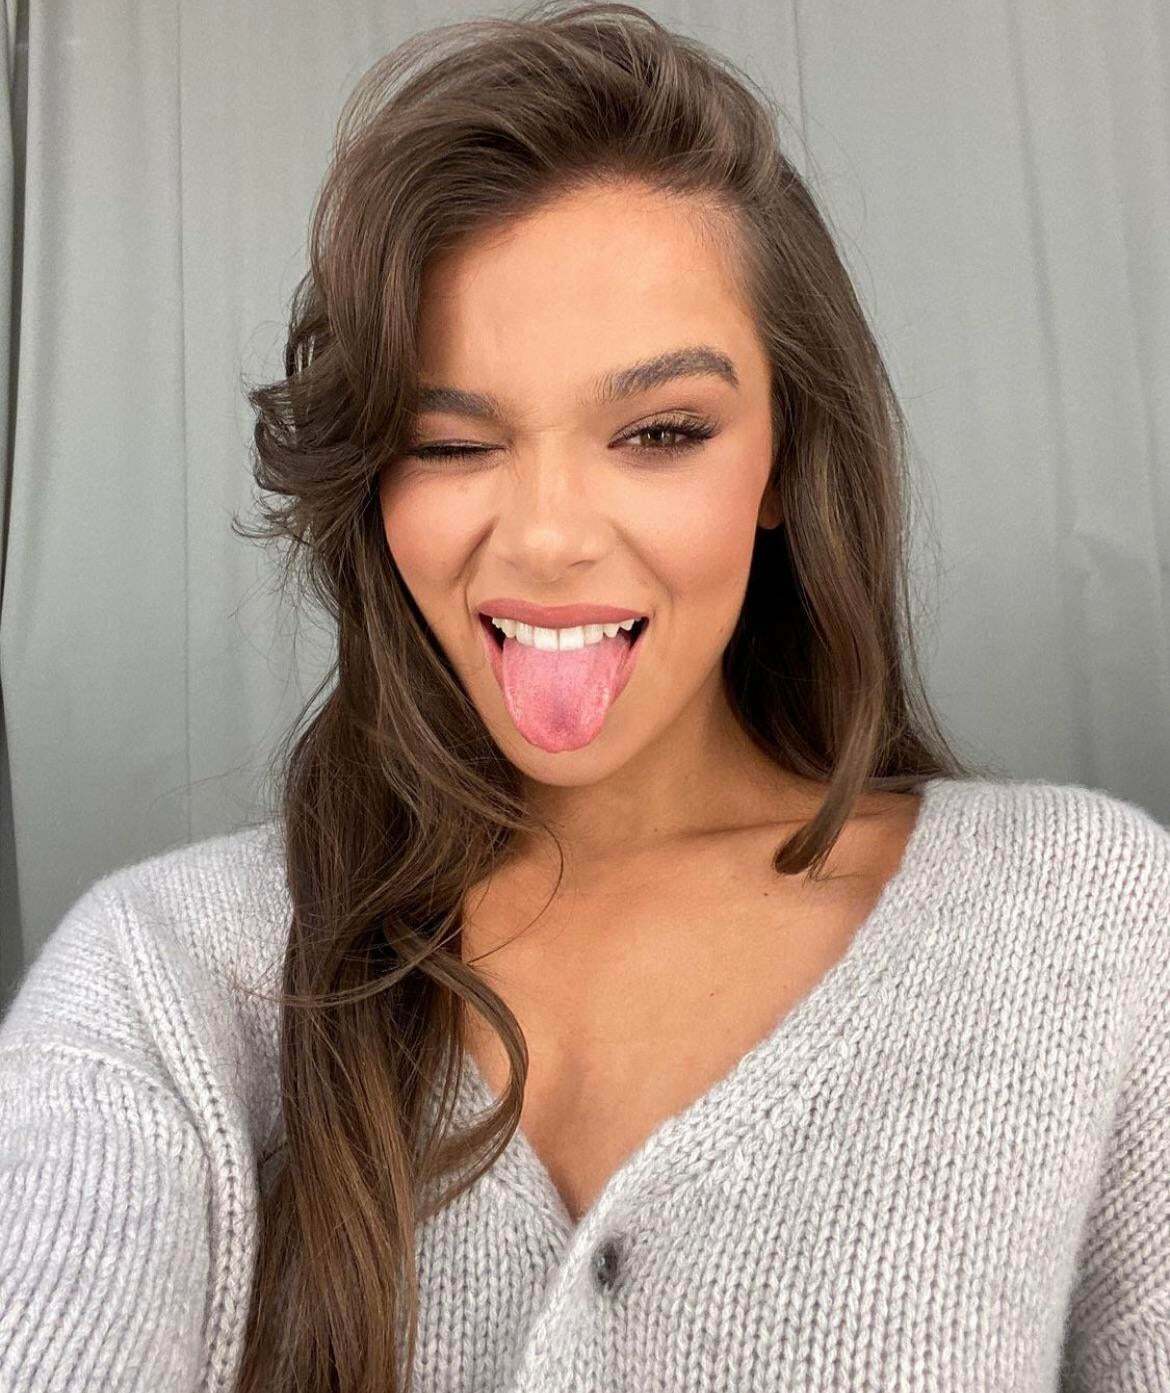 What’s the hottest thing Hailee Steinfeld could say that would make you bust immediately?